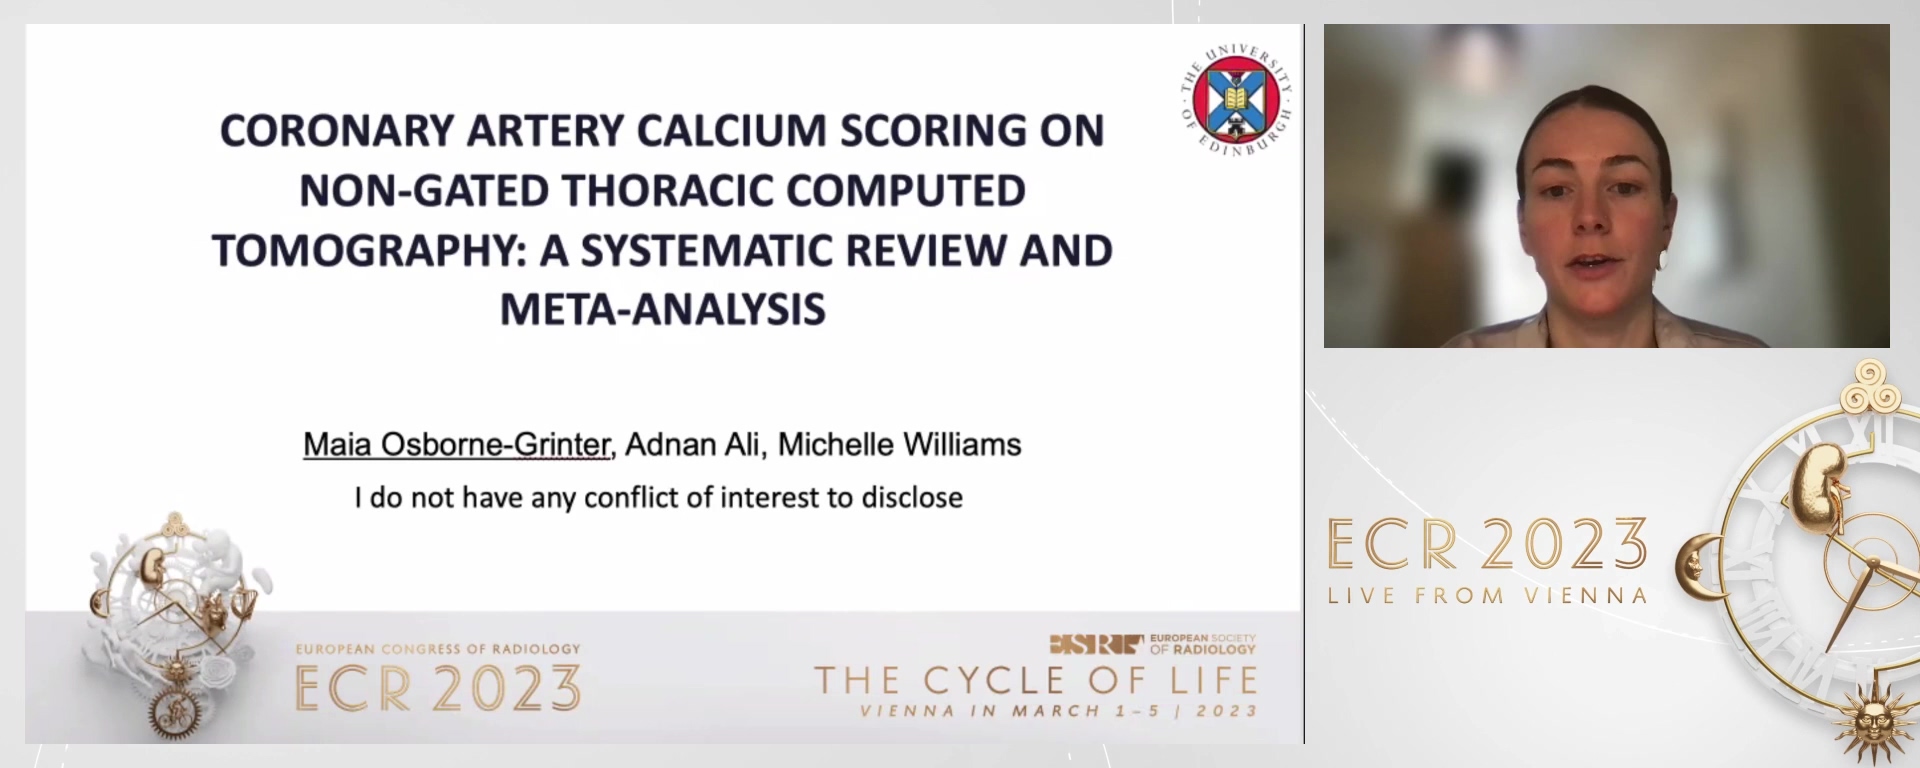 Coronary artery calcium scoring on non-gated thoracic computed tomography: a systematic review and meta-analysis - Maia  Osborne-Grinter, Bristol / UK